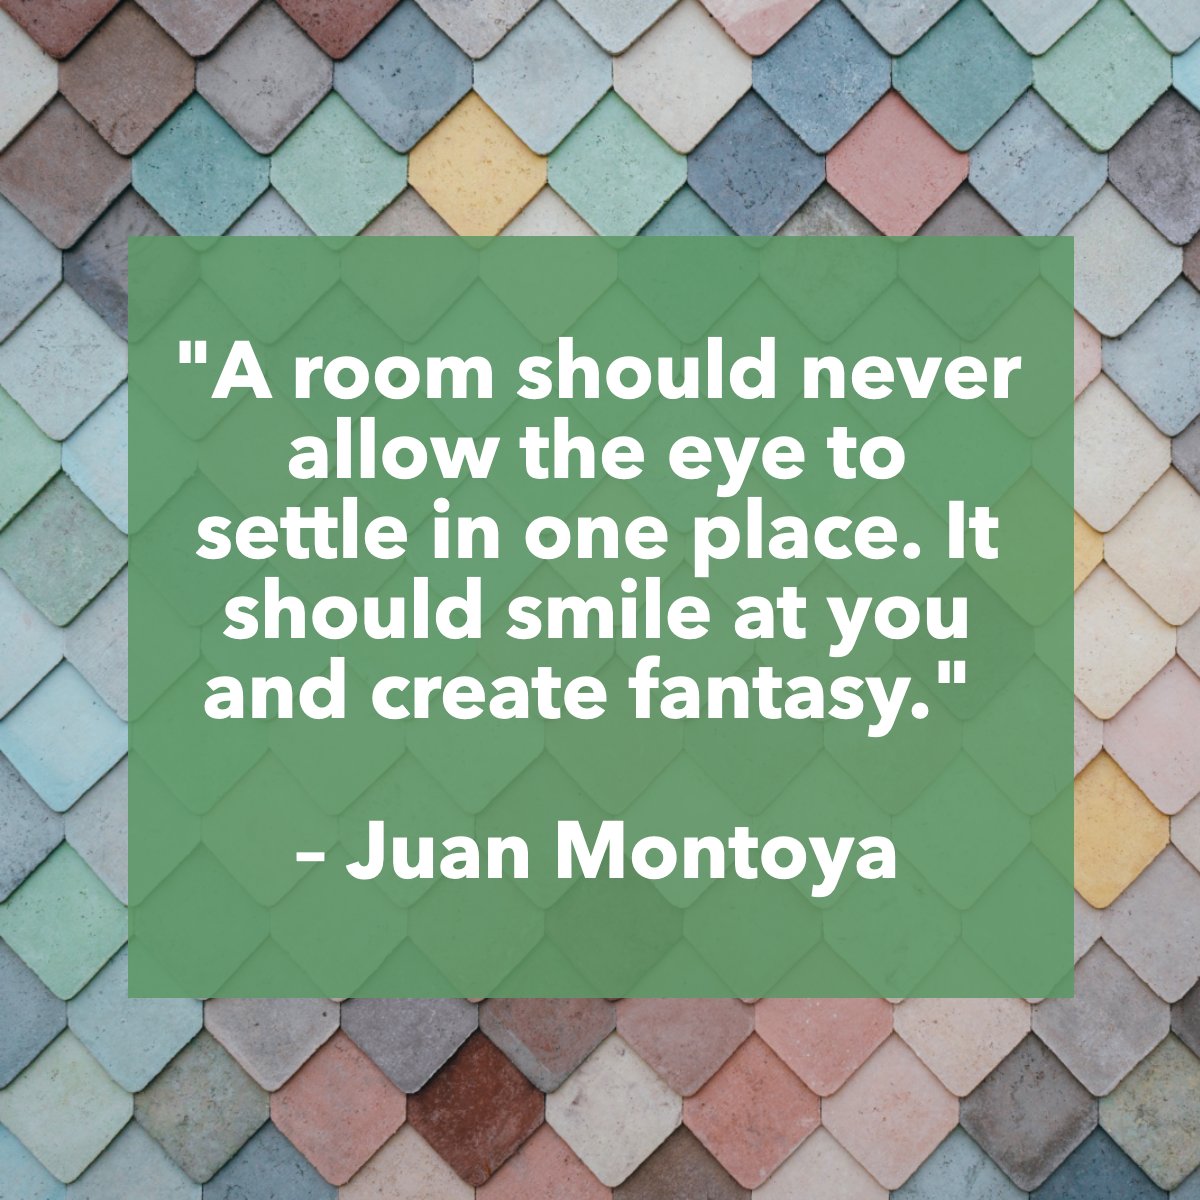 'A room should never allow the eye to settle in one place. It should smile at you and create fantasy.'
― Juan Montoya 📖

#design #roomdesign #decor #interior #inspiring #quote #quoteoftheday
 #douglascountyrealestate #propertyforsale #cadwellrealtygroup